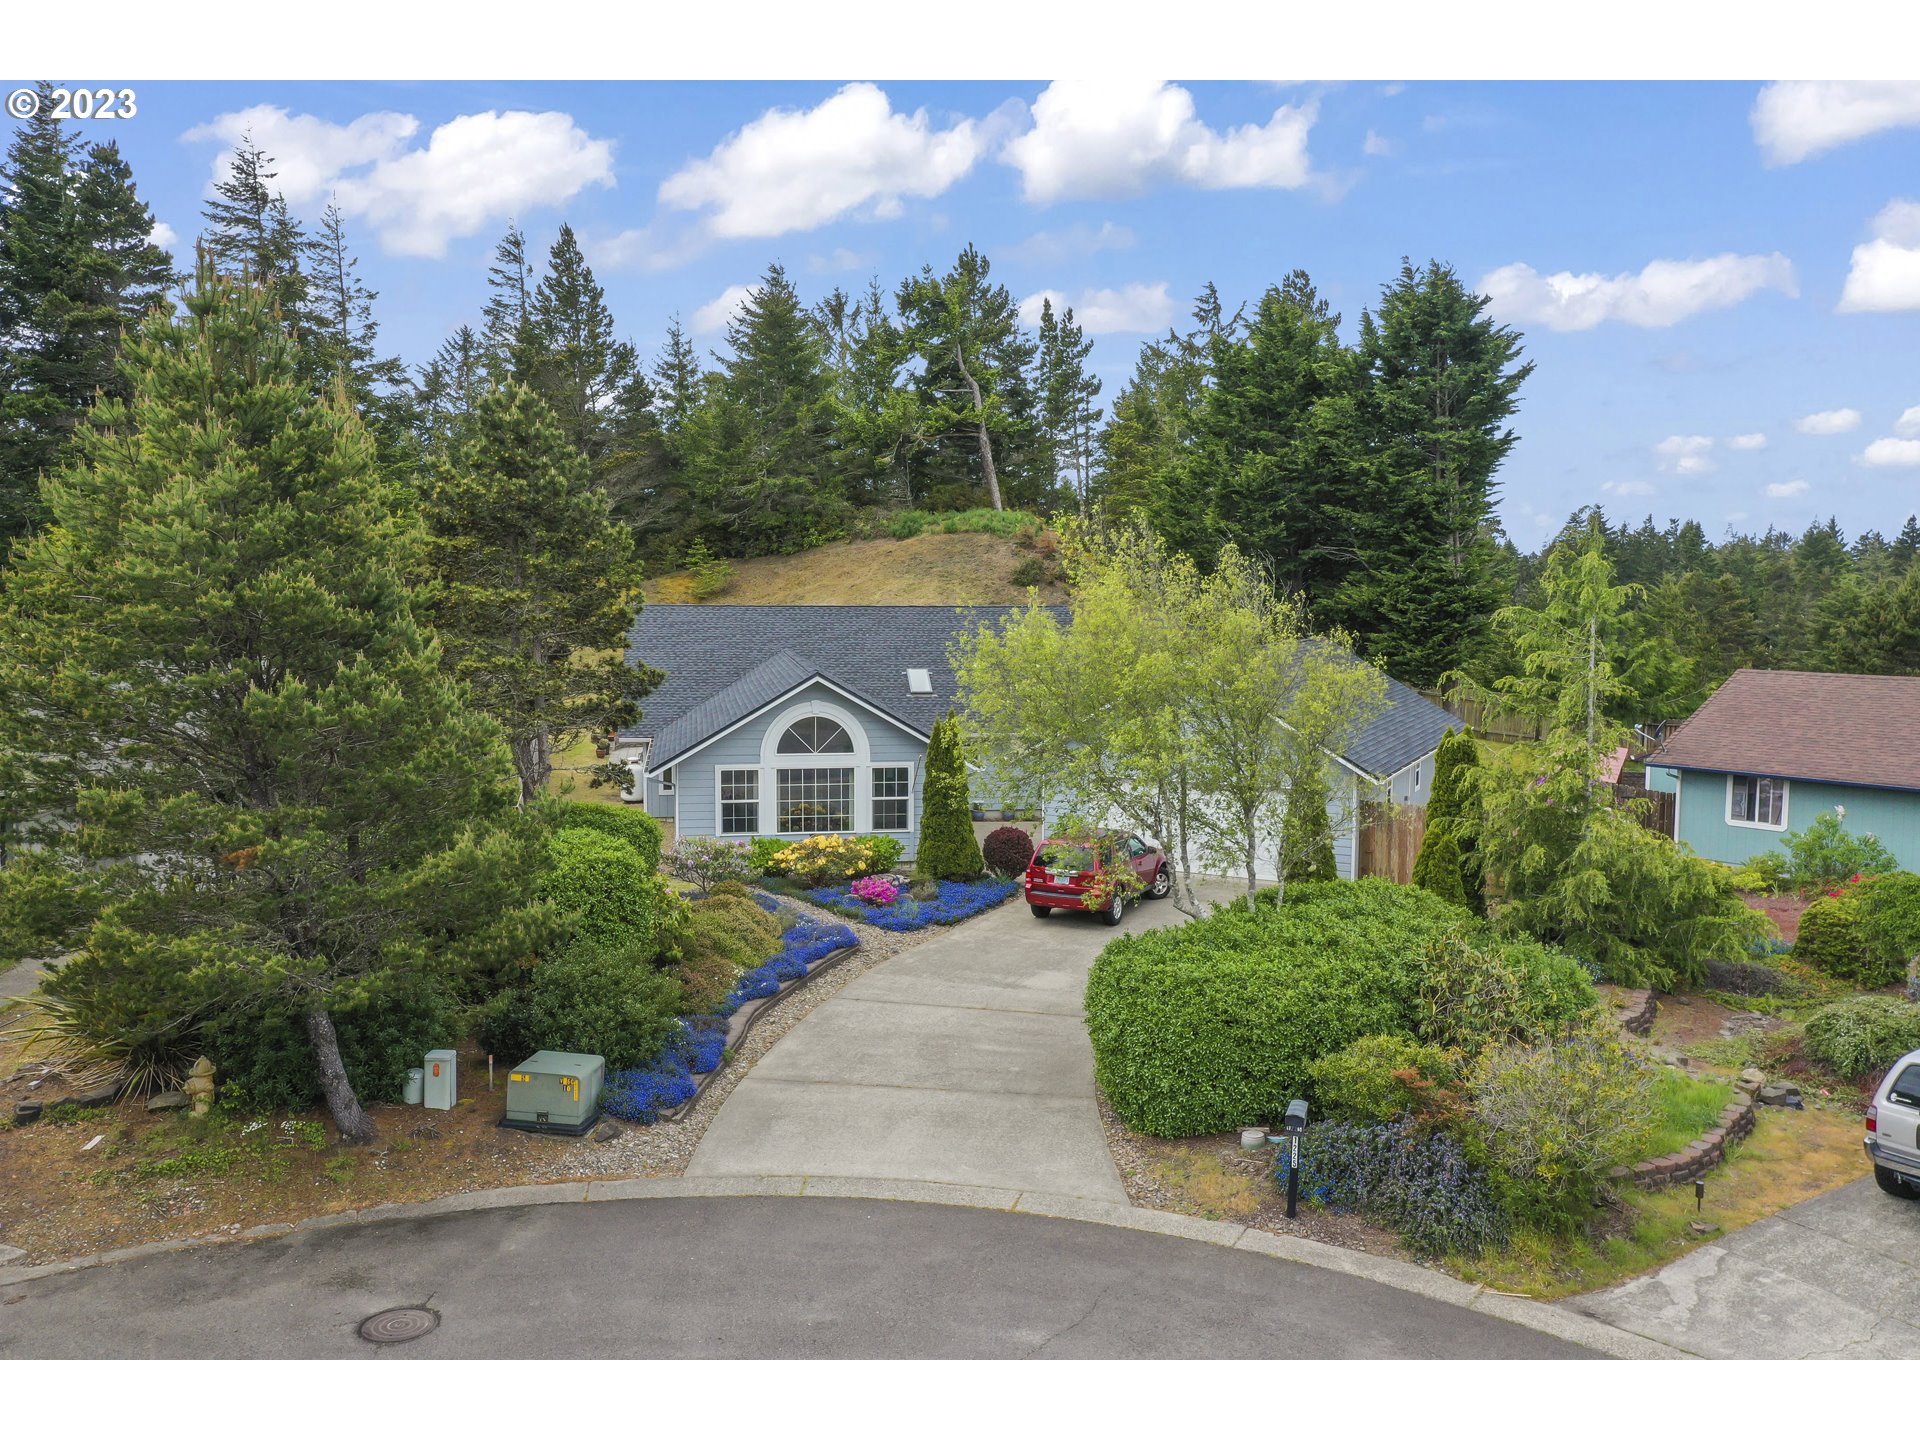 1225 WILLOW CT, Florence, OR 97439